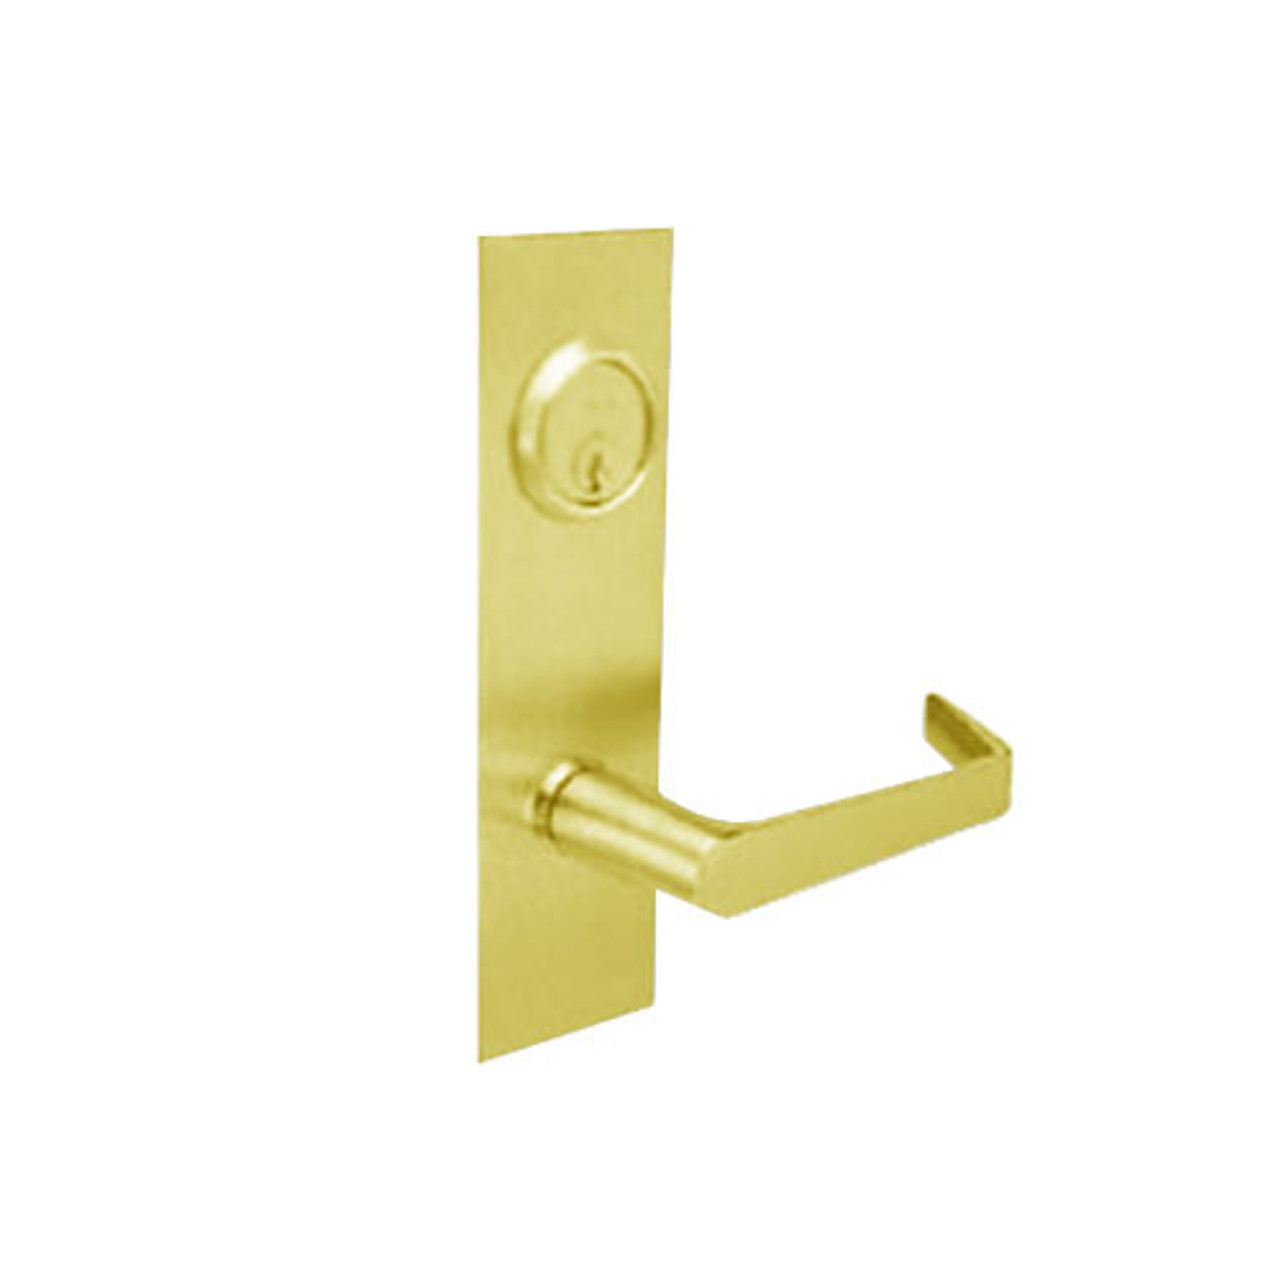 BM09-XH-03 Arrow Mortise Lock BM Series Full Dummy Lever with Xavier Design and H Escutcheon in Bright Brass